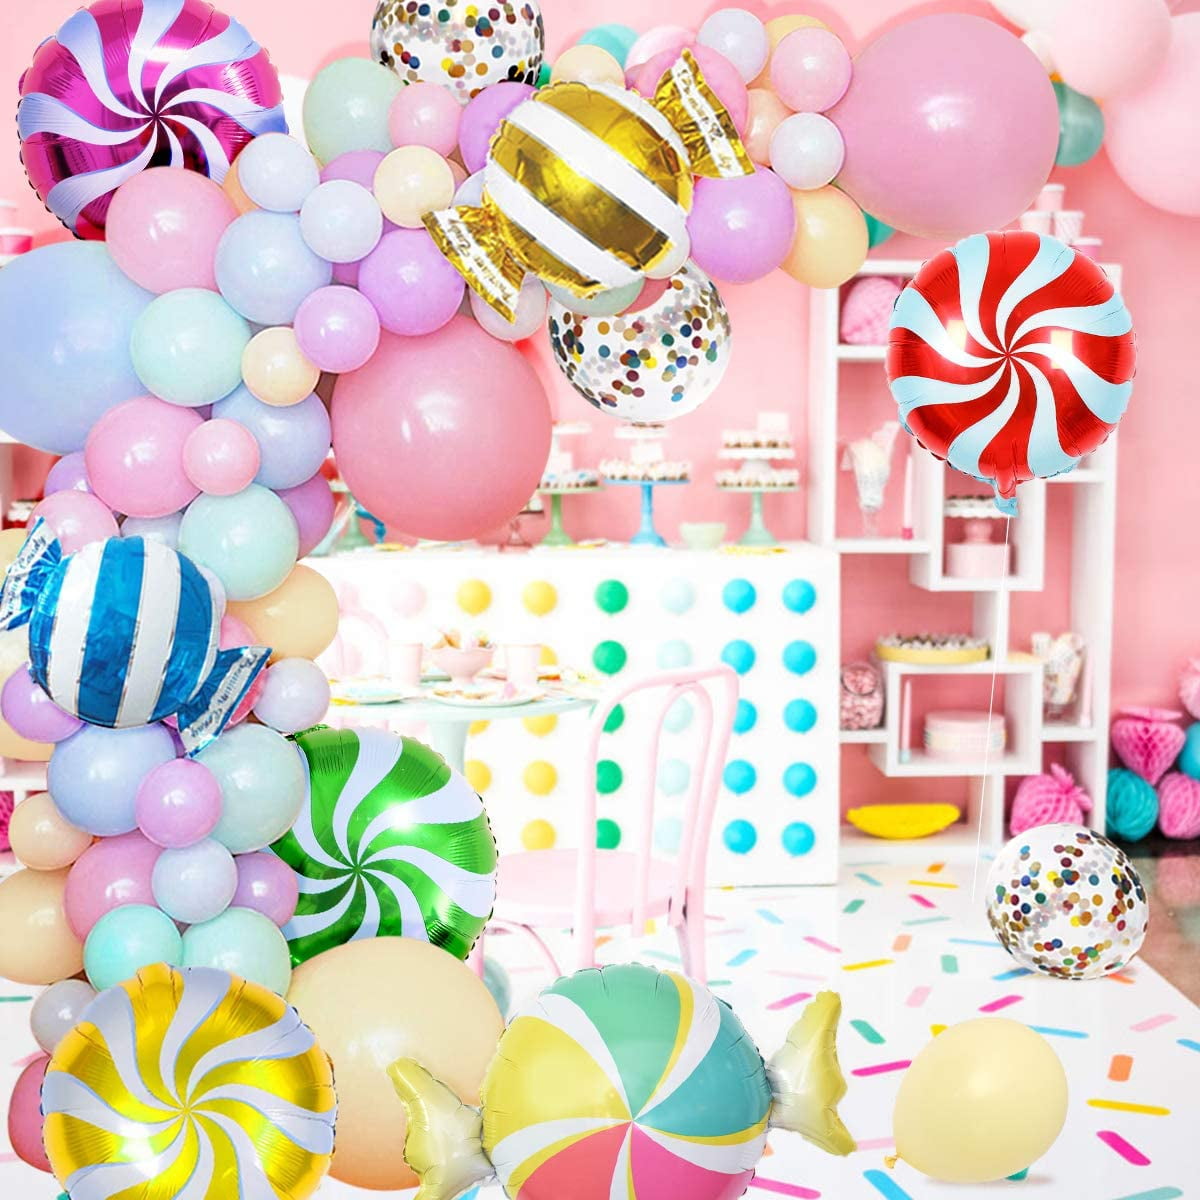 Candyland Birthday Party Decorations Pastel Candy Balloon Garland and Arch  Kit, Lollipop Banner Cupcake Toppers, Donut Balloons for Girls Kids  Christmas Holiday Candy Theme Baby Shower Birthday Party Supplies :  Amazon.in: Toys